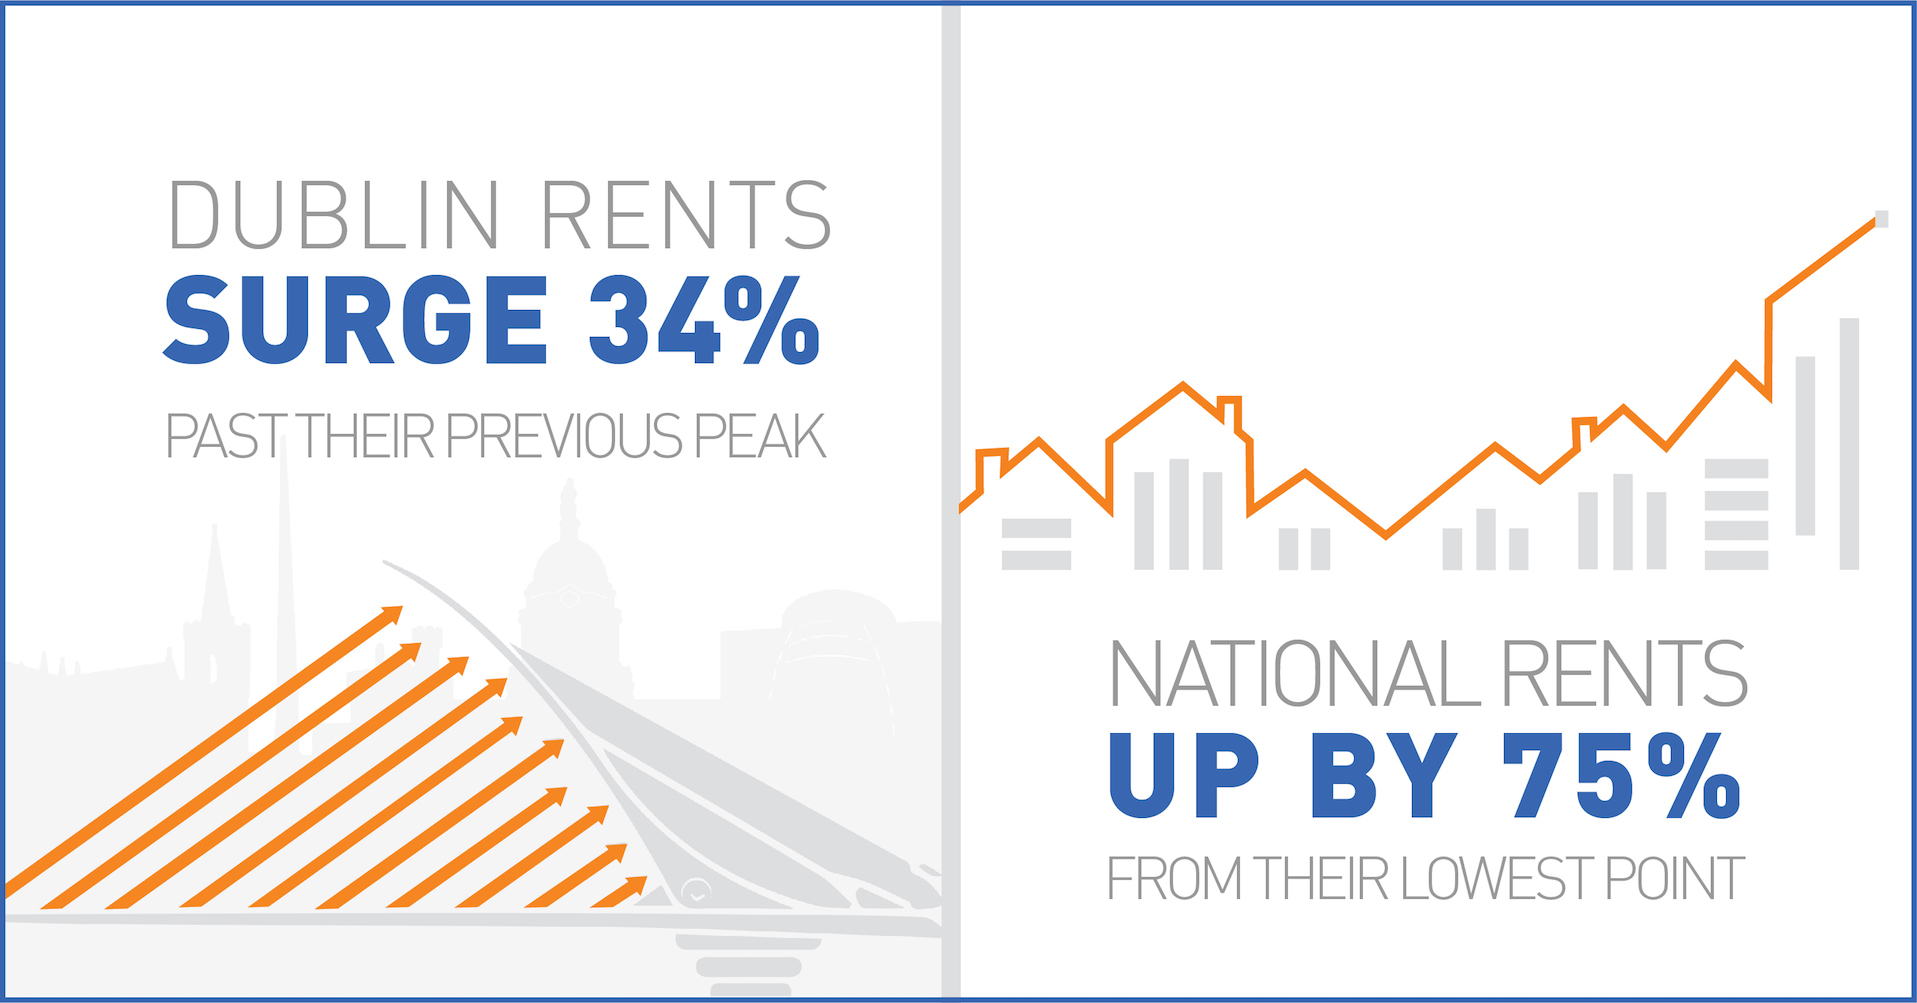 Dublin and National rents surging upwards